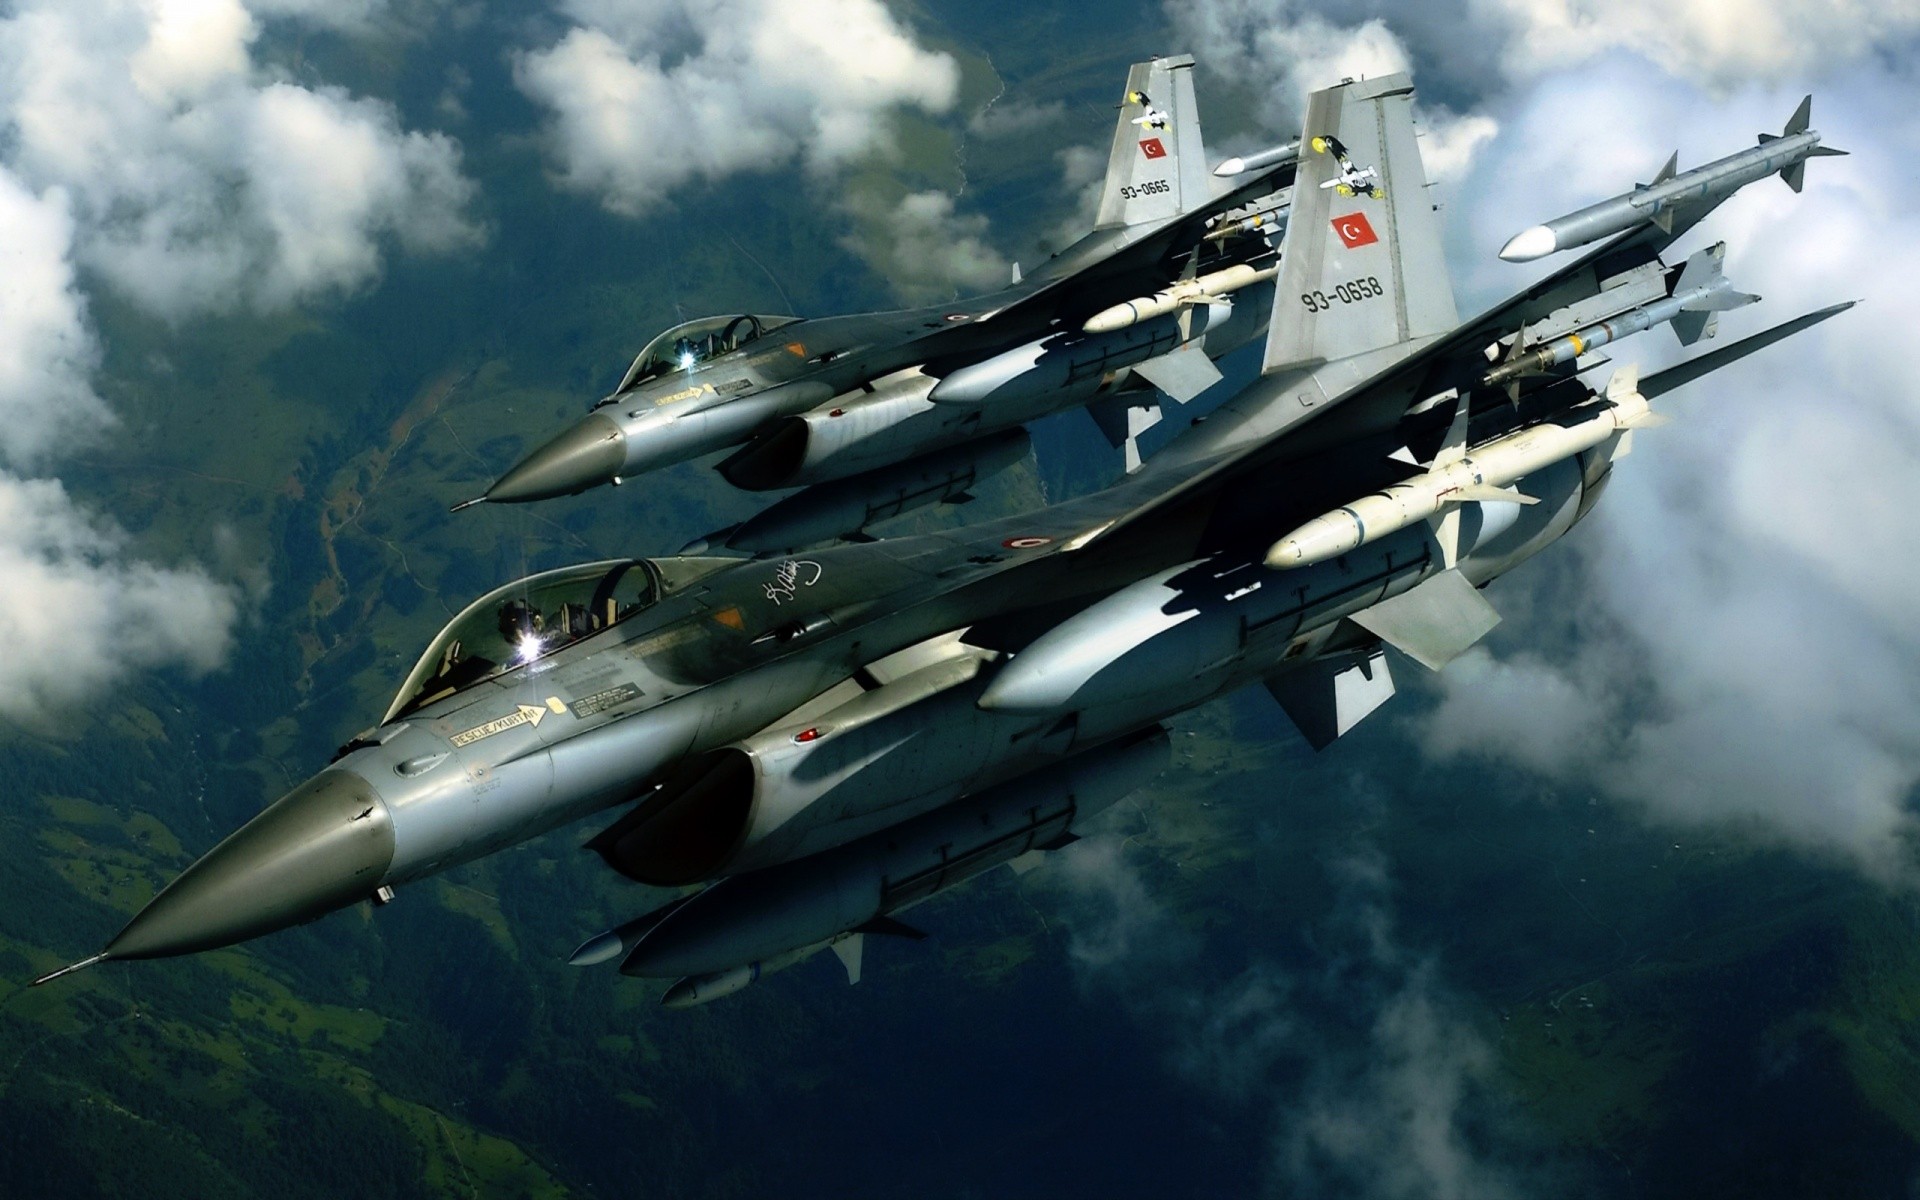 General 1920x1200 General Dynamics F-16 Fighting Falcon TUAF Turkish Armed Forces jet fighter military aircraft military vehicle military vehicle aircraft General Dynamics American aircraft